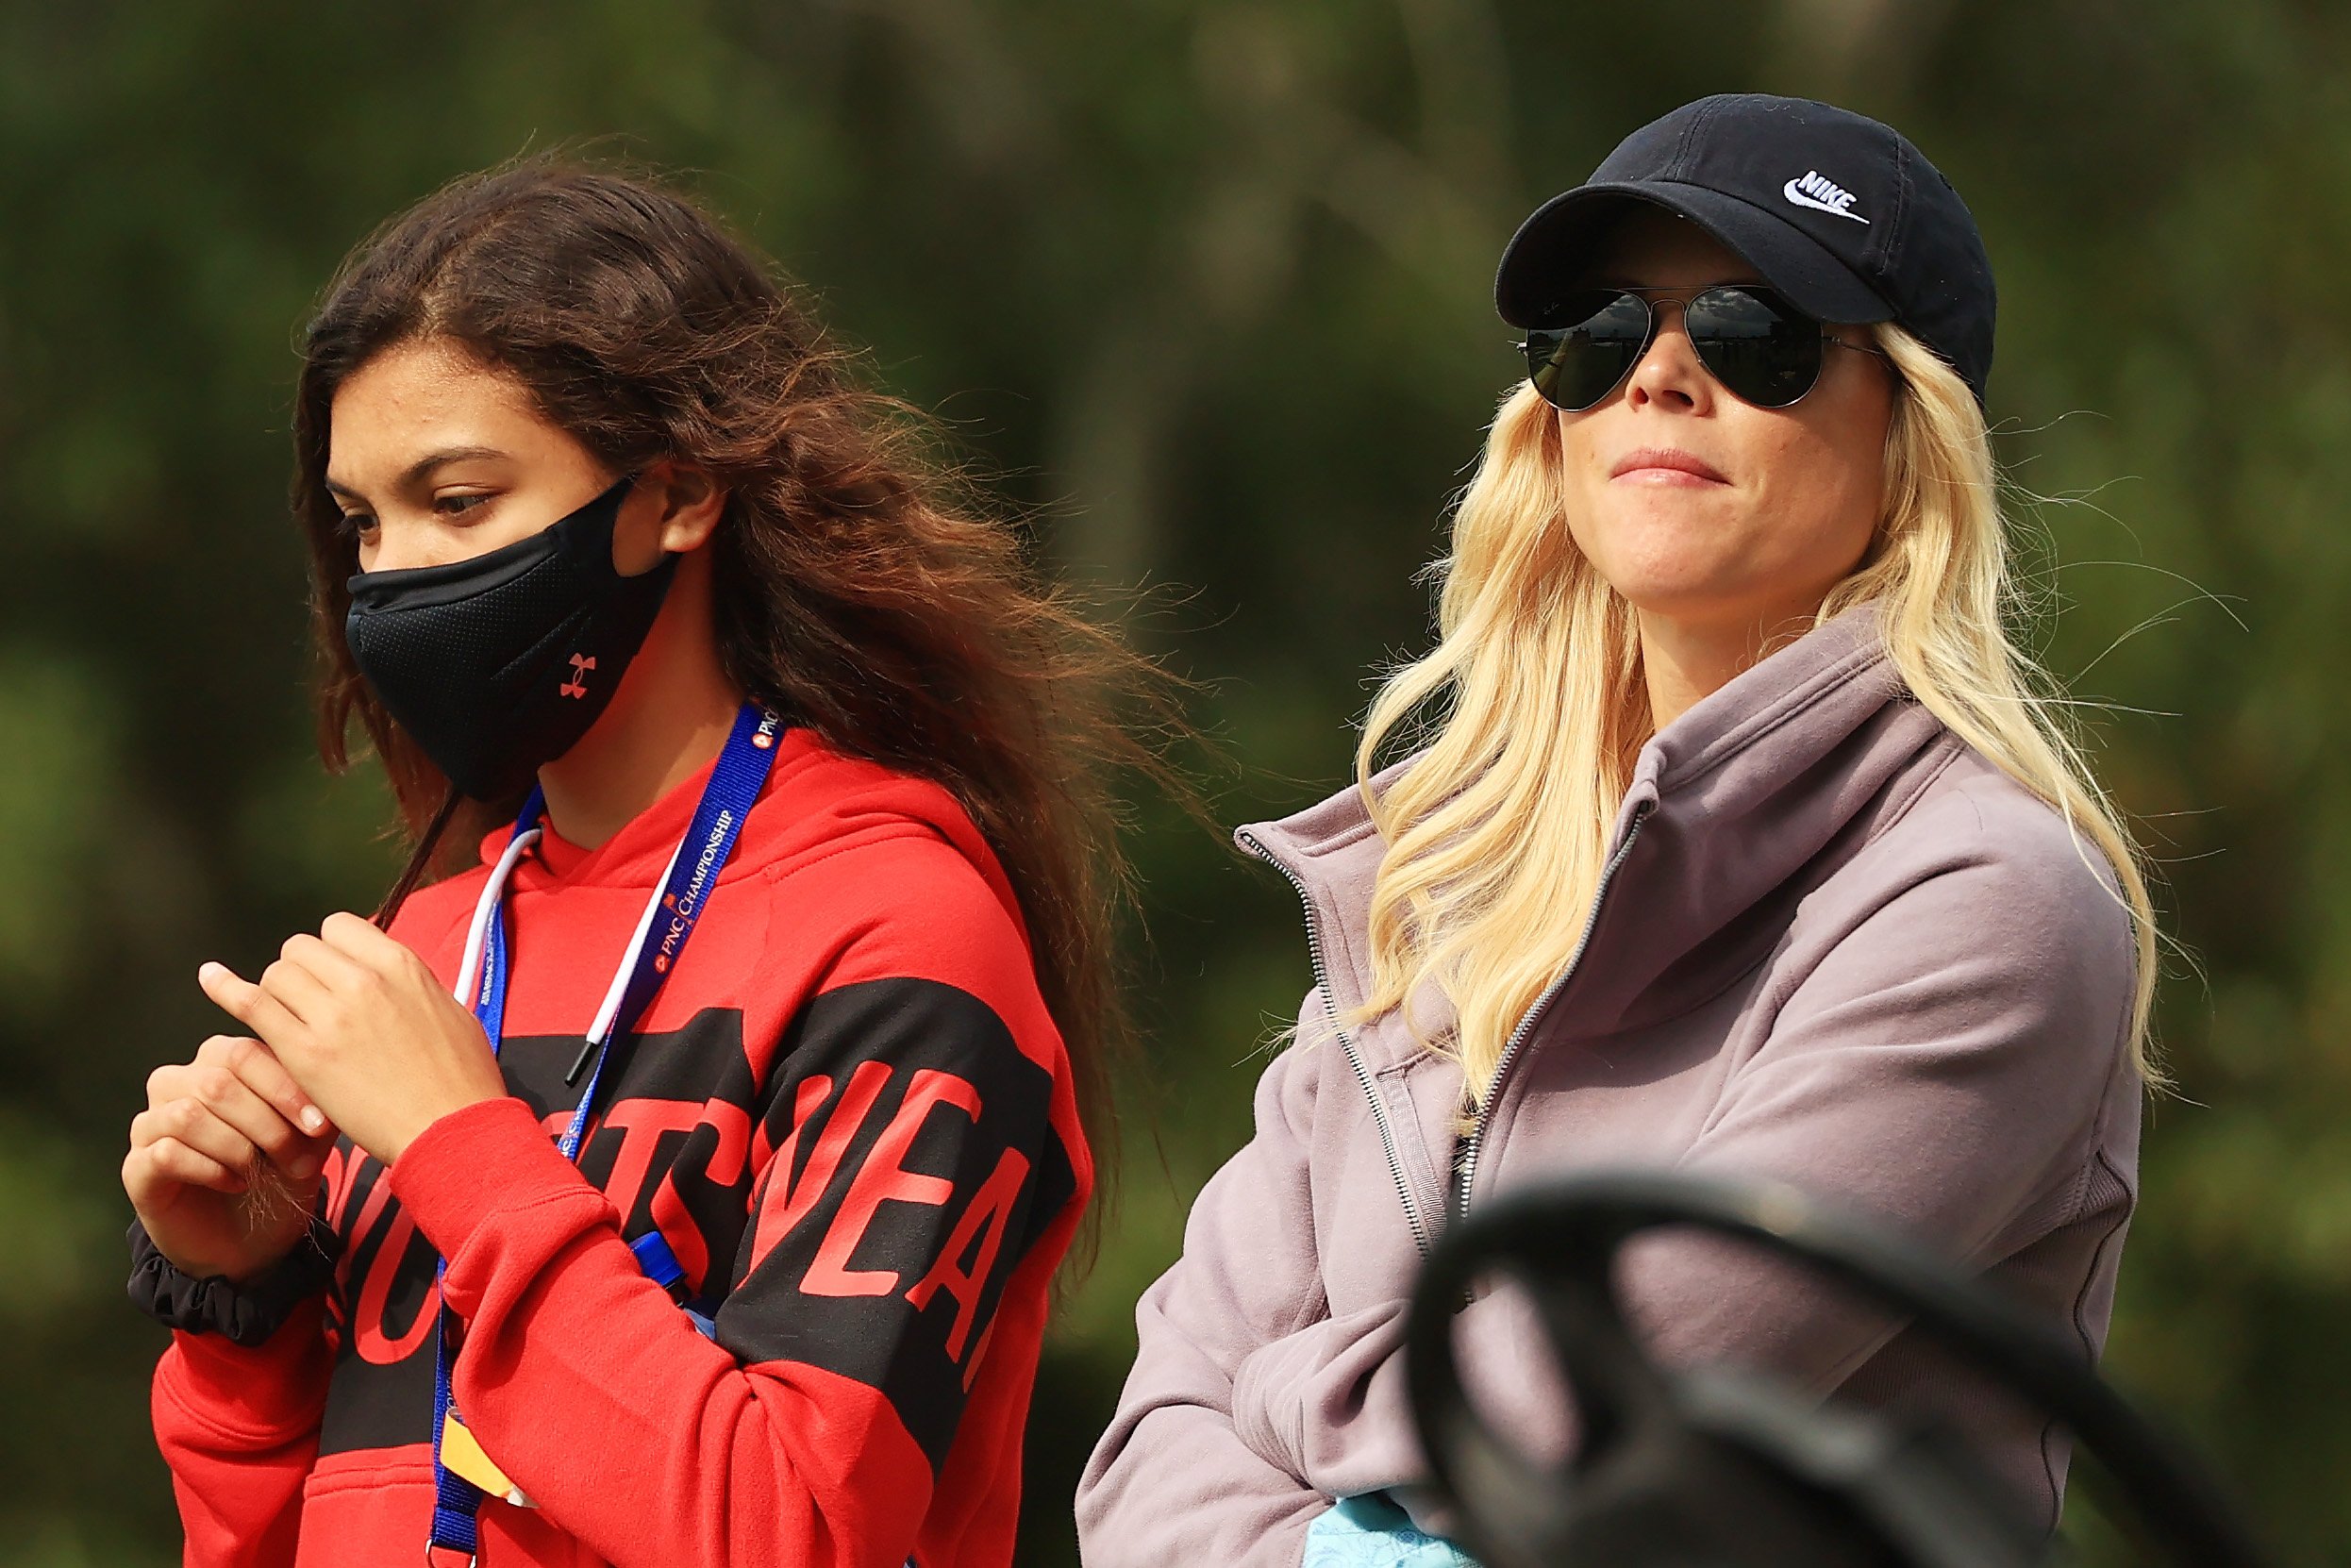  Sam Woods, daughter of Tiger Woods of the United States, and her mother Elin Nordegren look on during the final round of the PNC Championship at the Ritz-Carlton Golf Club Orlando on December 20, 2020, in Orlando, Florida. | Source: Getty Images